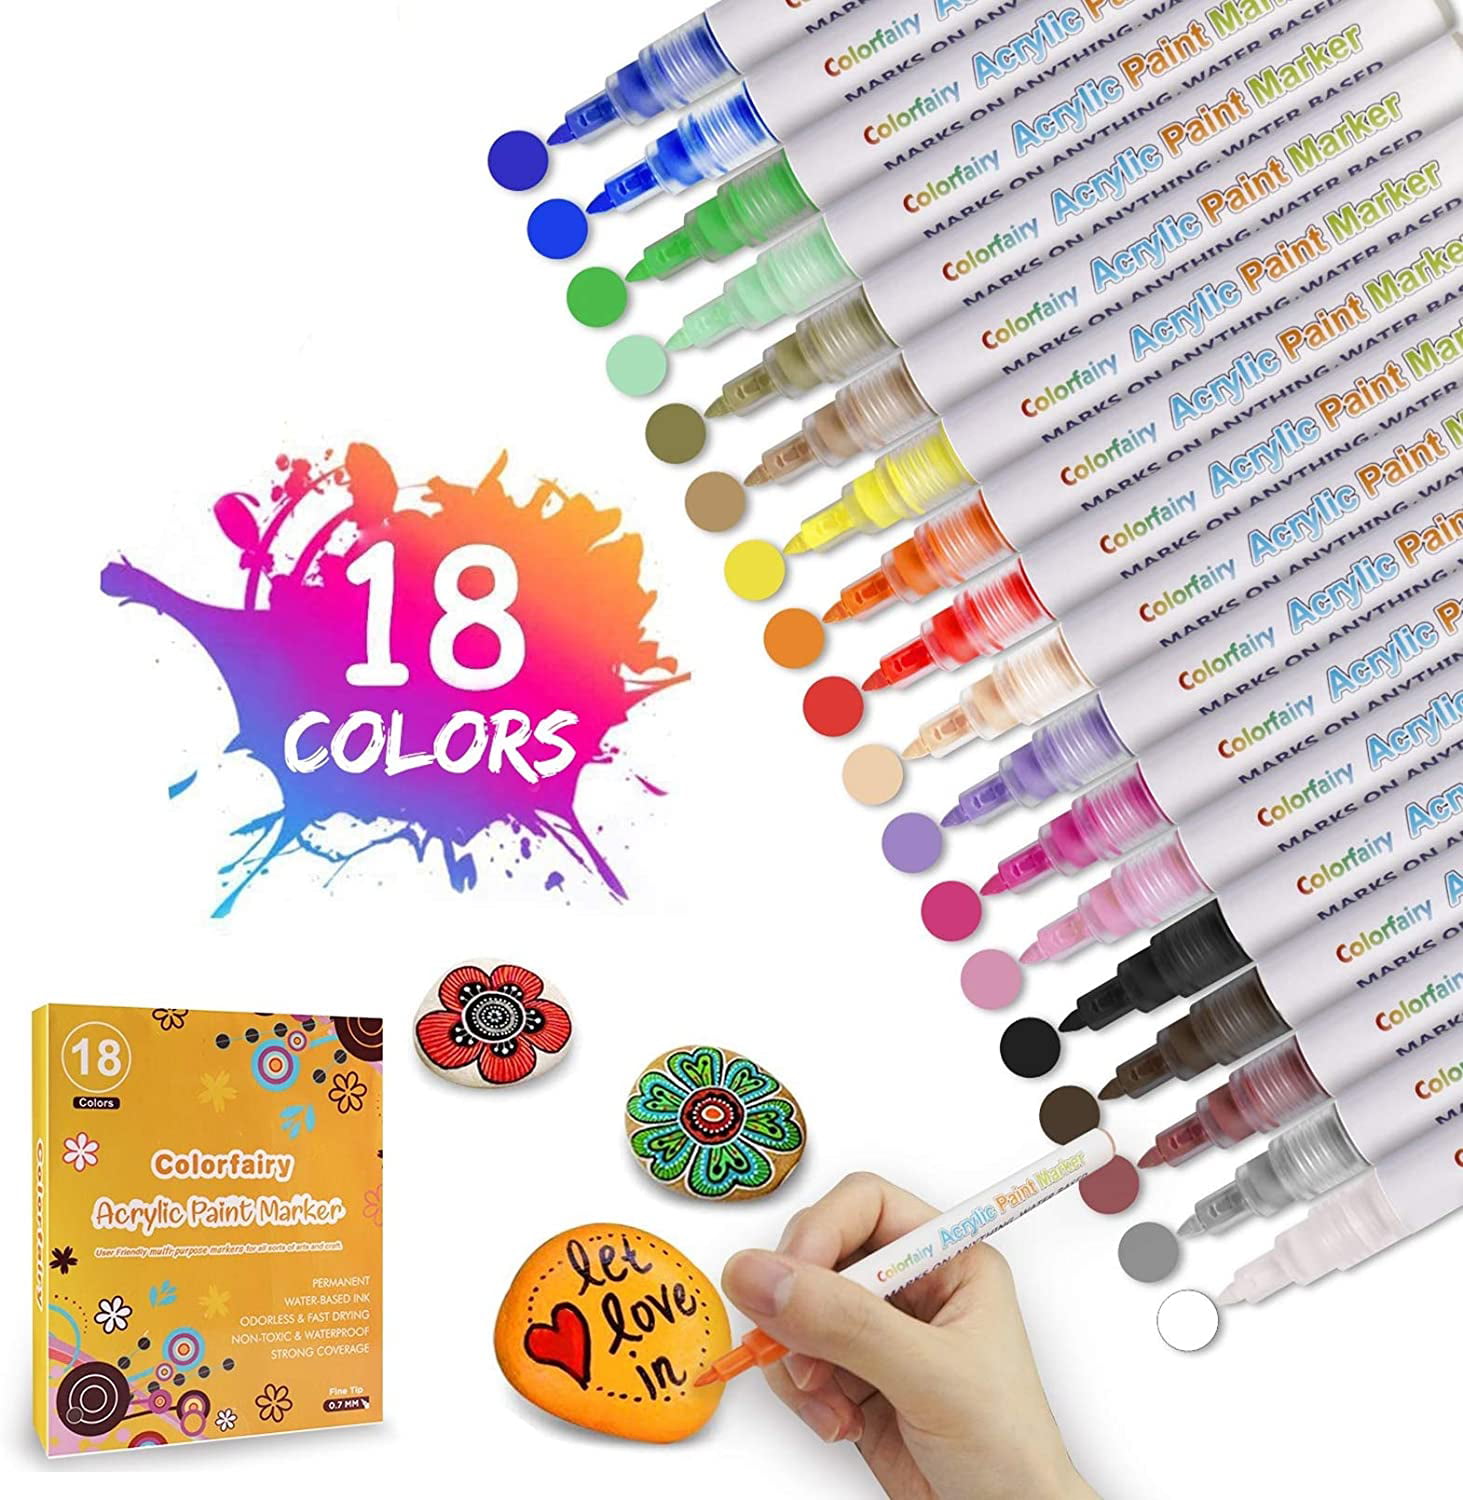 Wood Non Toxic Canva Ceramic,Glass Acrylic Paint Pens 18 Colors Permanent Paint Art Markers Waterbased Pen Set for Stone Quick Drying 0.7mm Fine Tip for Rock Painting Kit or DIY Projects 